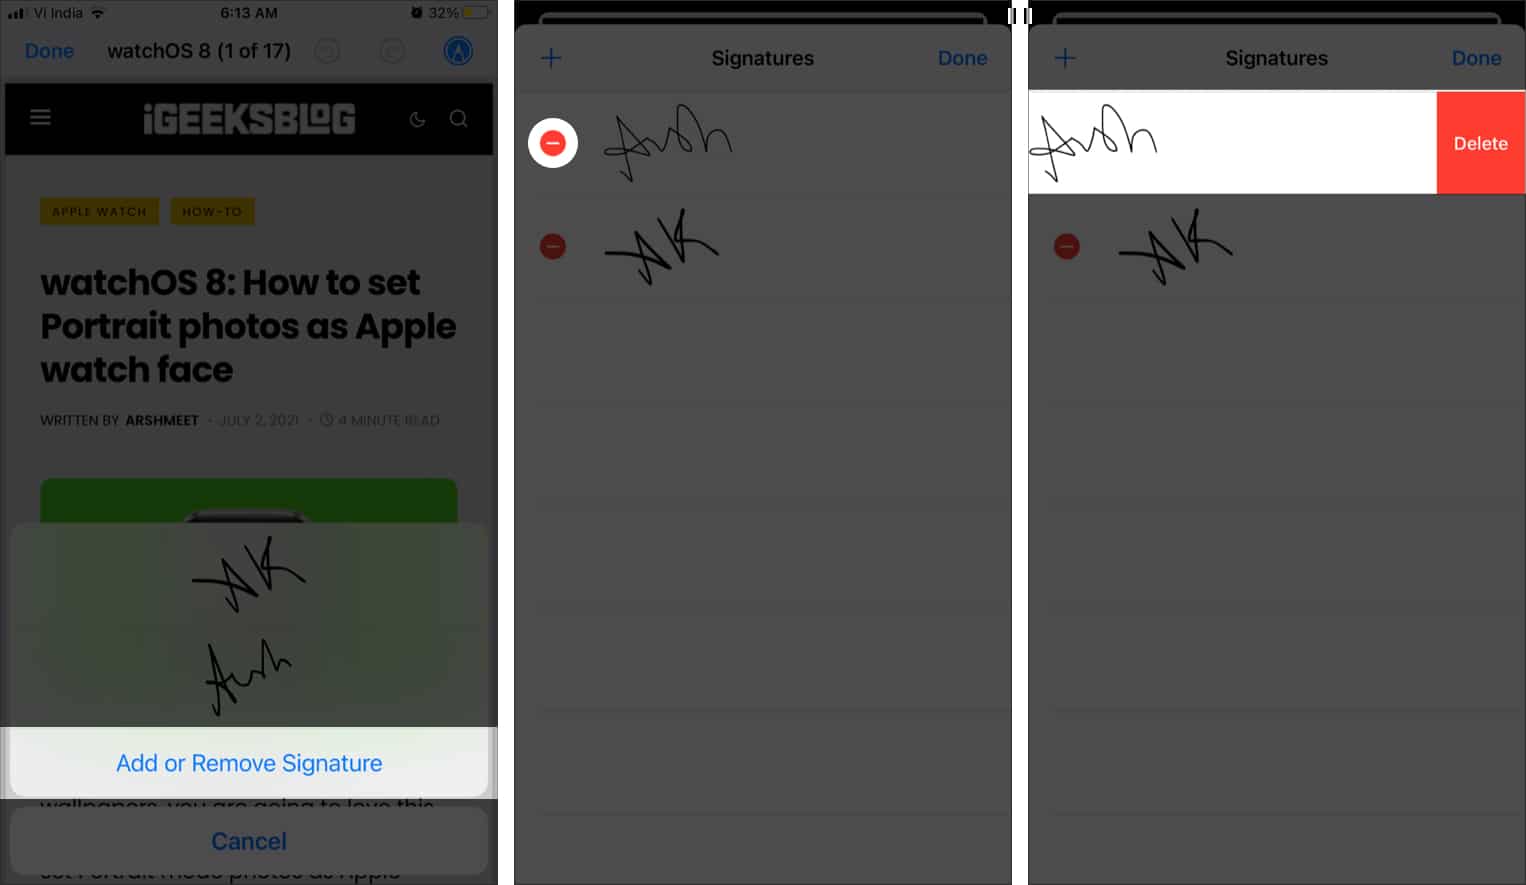 Delete saved signatures from iPhone, iPad